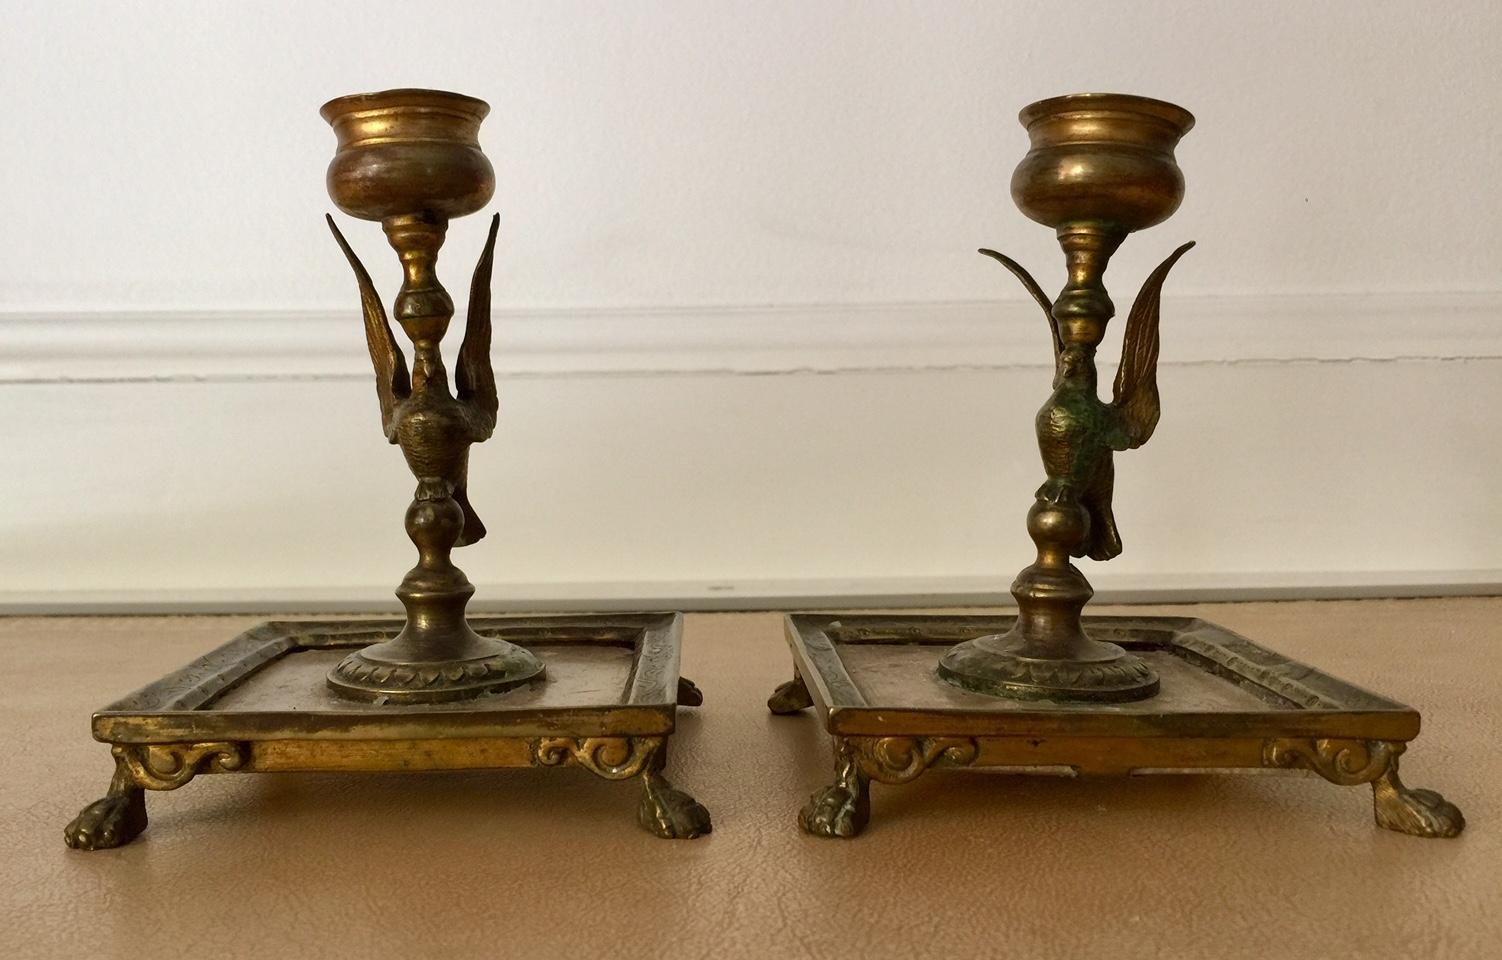 French Emprie Period pair of bronze candleholders, neoclassical
A rare collector quality pair of French First Empire candleholders. A classical bird figure rises from a square alabaster base with a bronze surrond. The design is simple and elegant